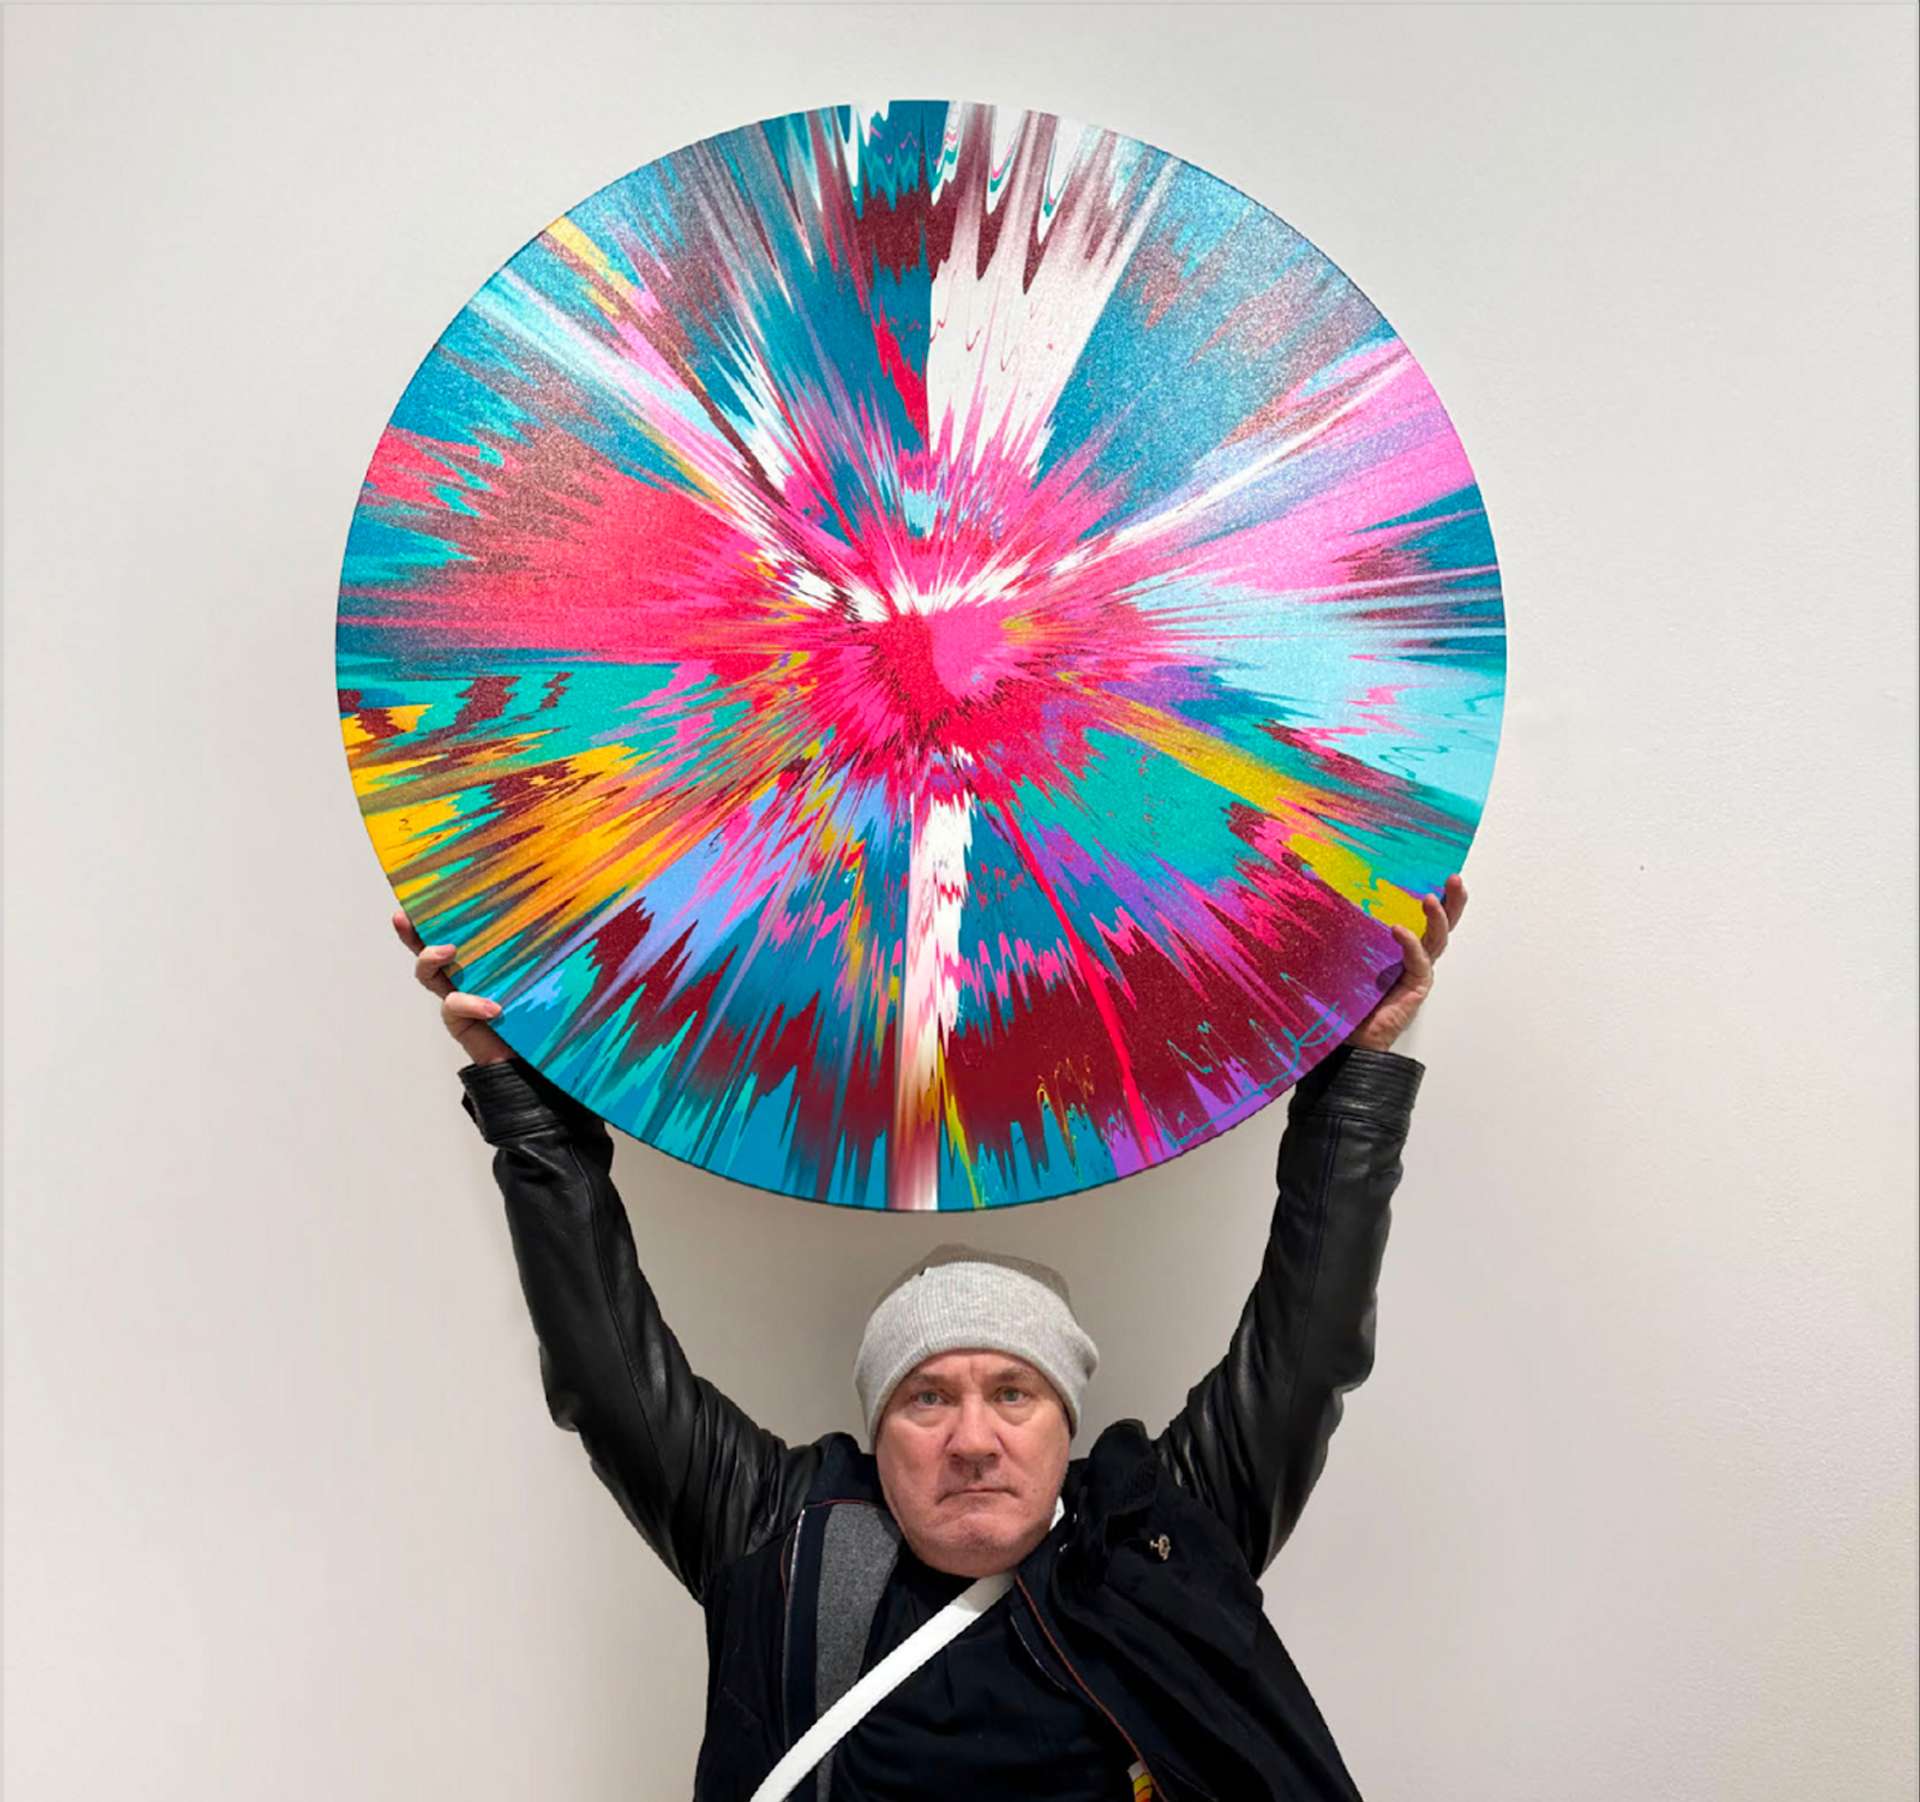 An image of the artist Damien Hirst holding an abstract, colourful round painting, part of his The Beautiful Paintings series.